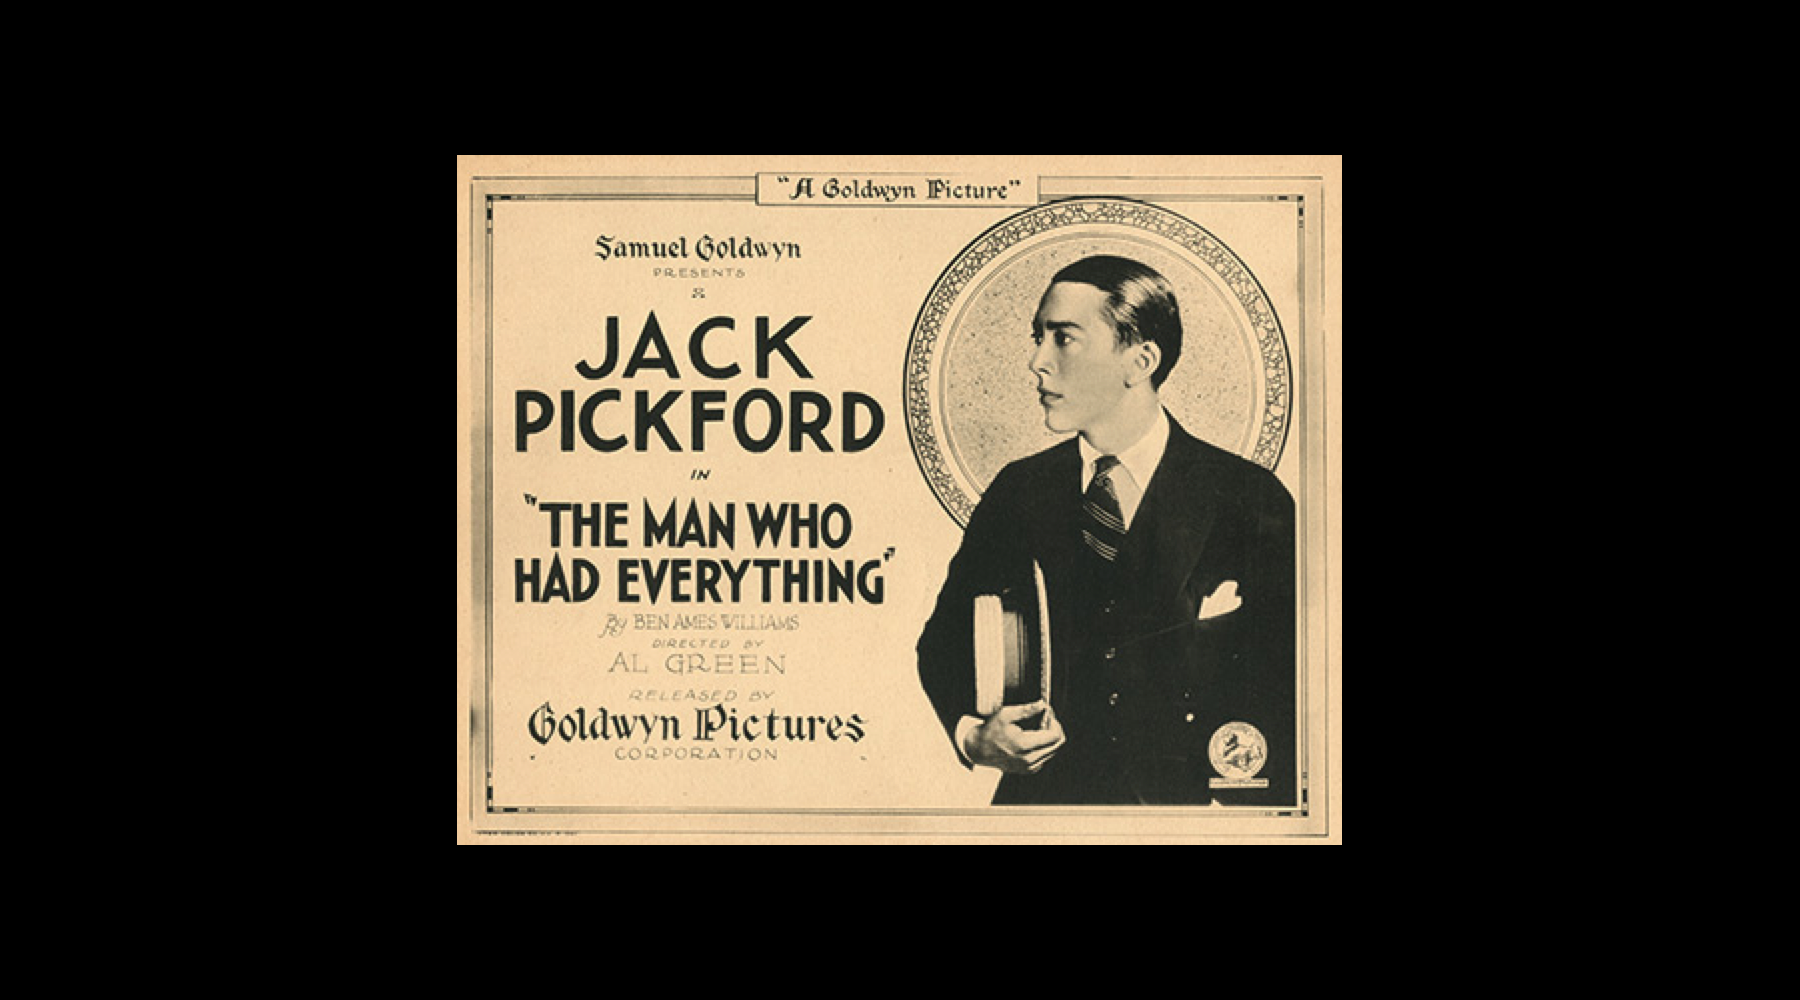 Jack Pickford, the man who had everything, even syphilis?